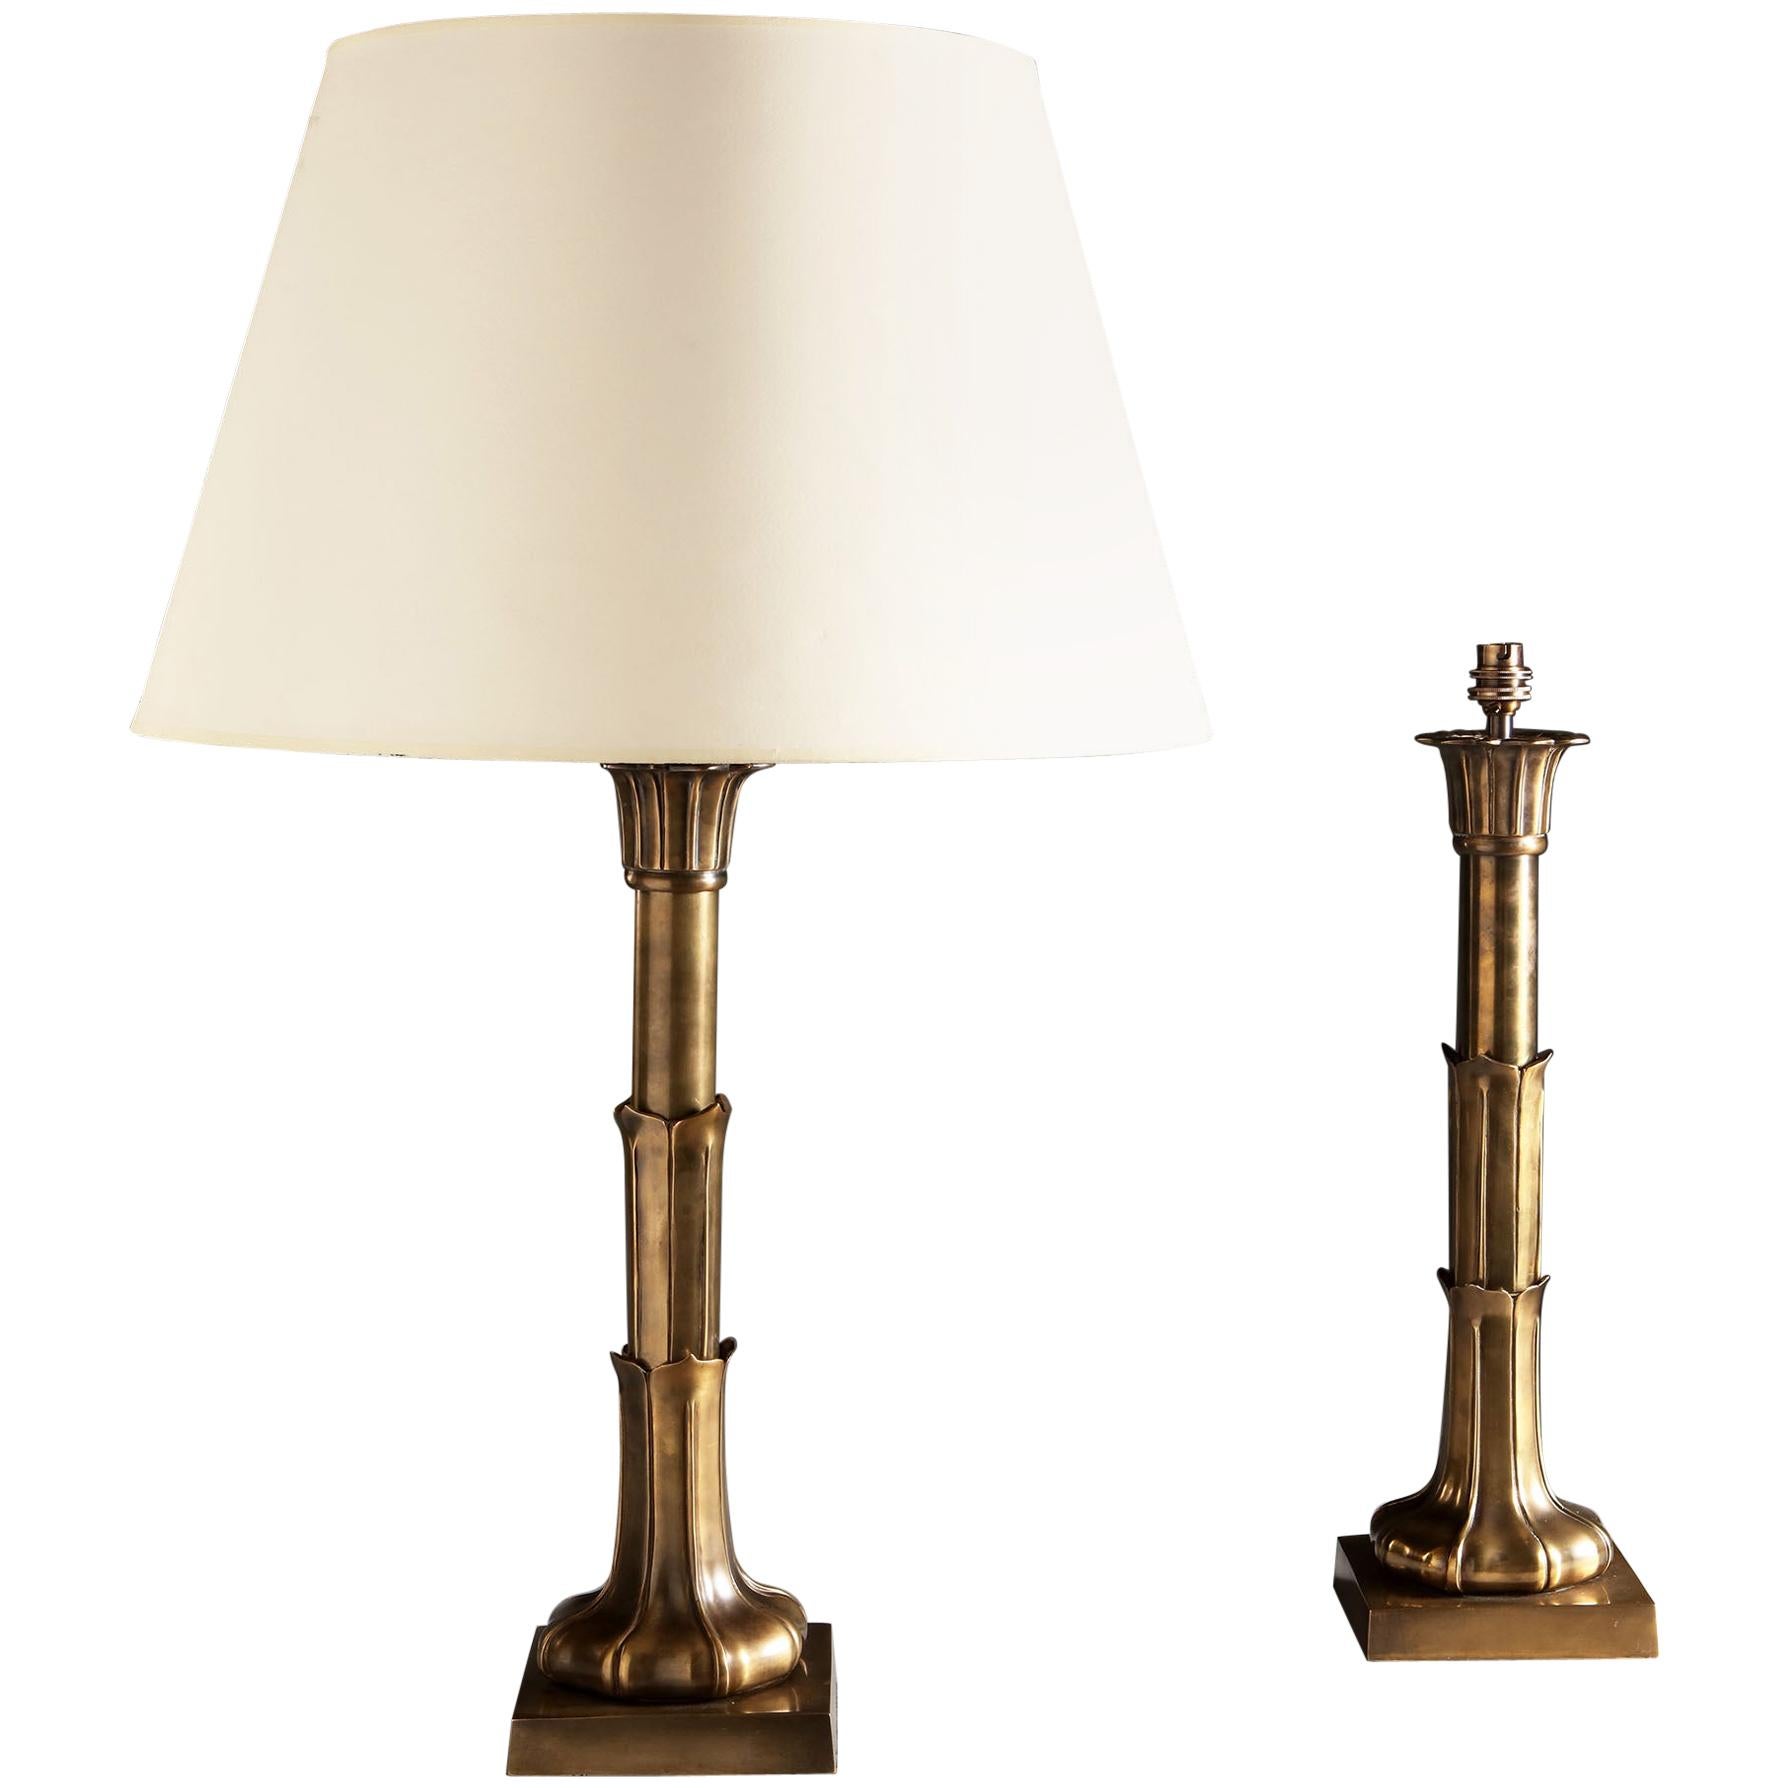 A Large Pair of 19th Century William IV Style Brass Column Table Lamps 